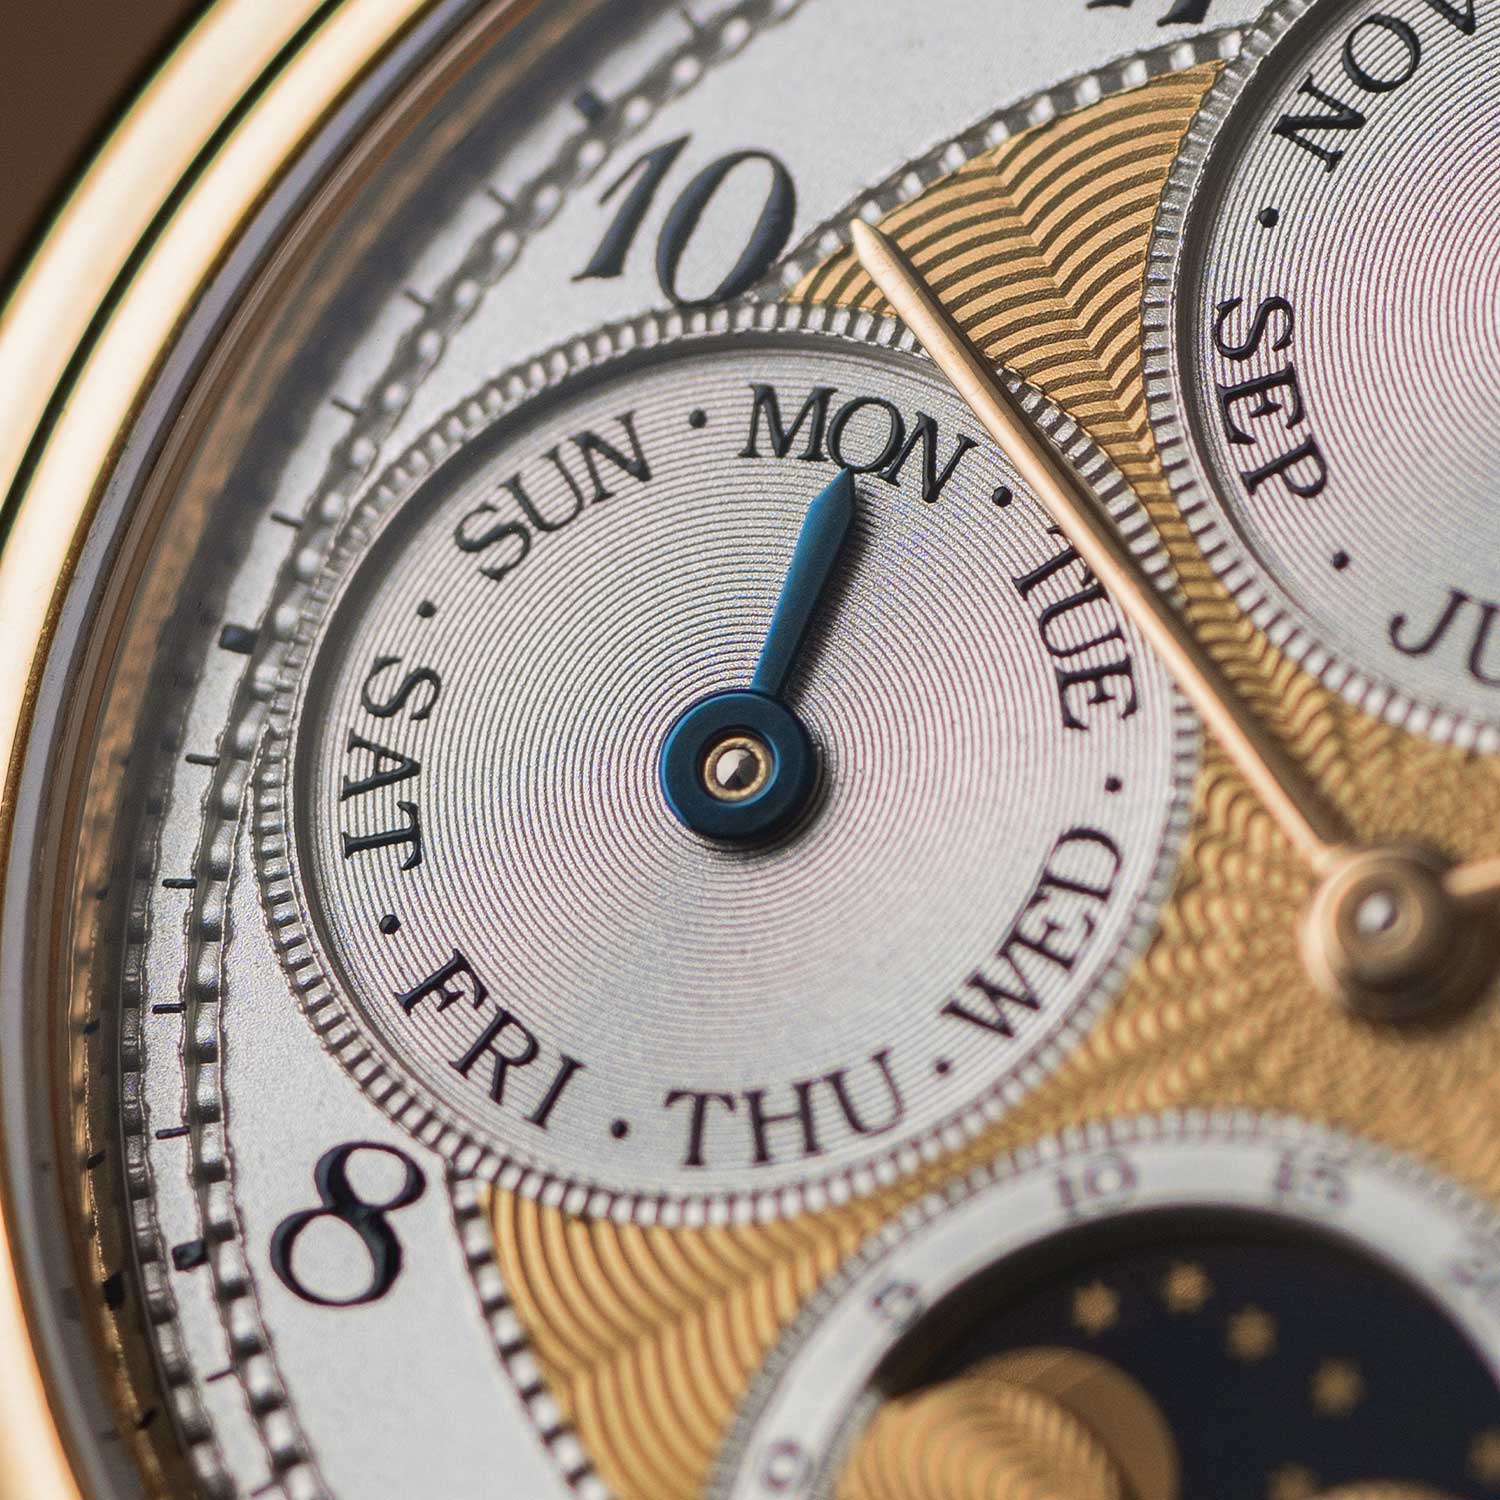 A close up of the day subdial, showing the sunken level on the dial. Curious detail to note, the convention of perpetual calendar watches is to list SUN at the 12 o'clock position of the day-subdial. In these special executions however, the day at the 12 o'clock position is very interestingly, MON. The watch seen here is presently part of the Pygmalion Gallery's private collection (Image: Photo and watch, property of Pygmalion Gallery)